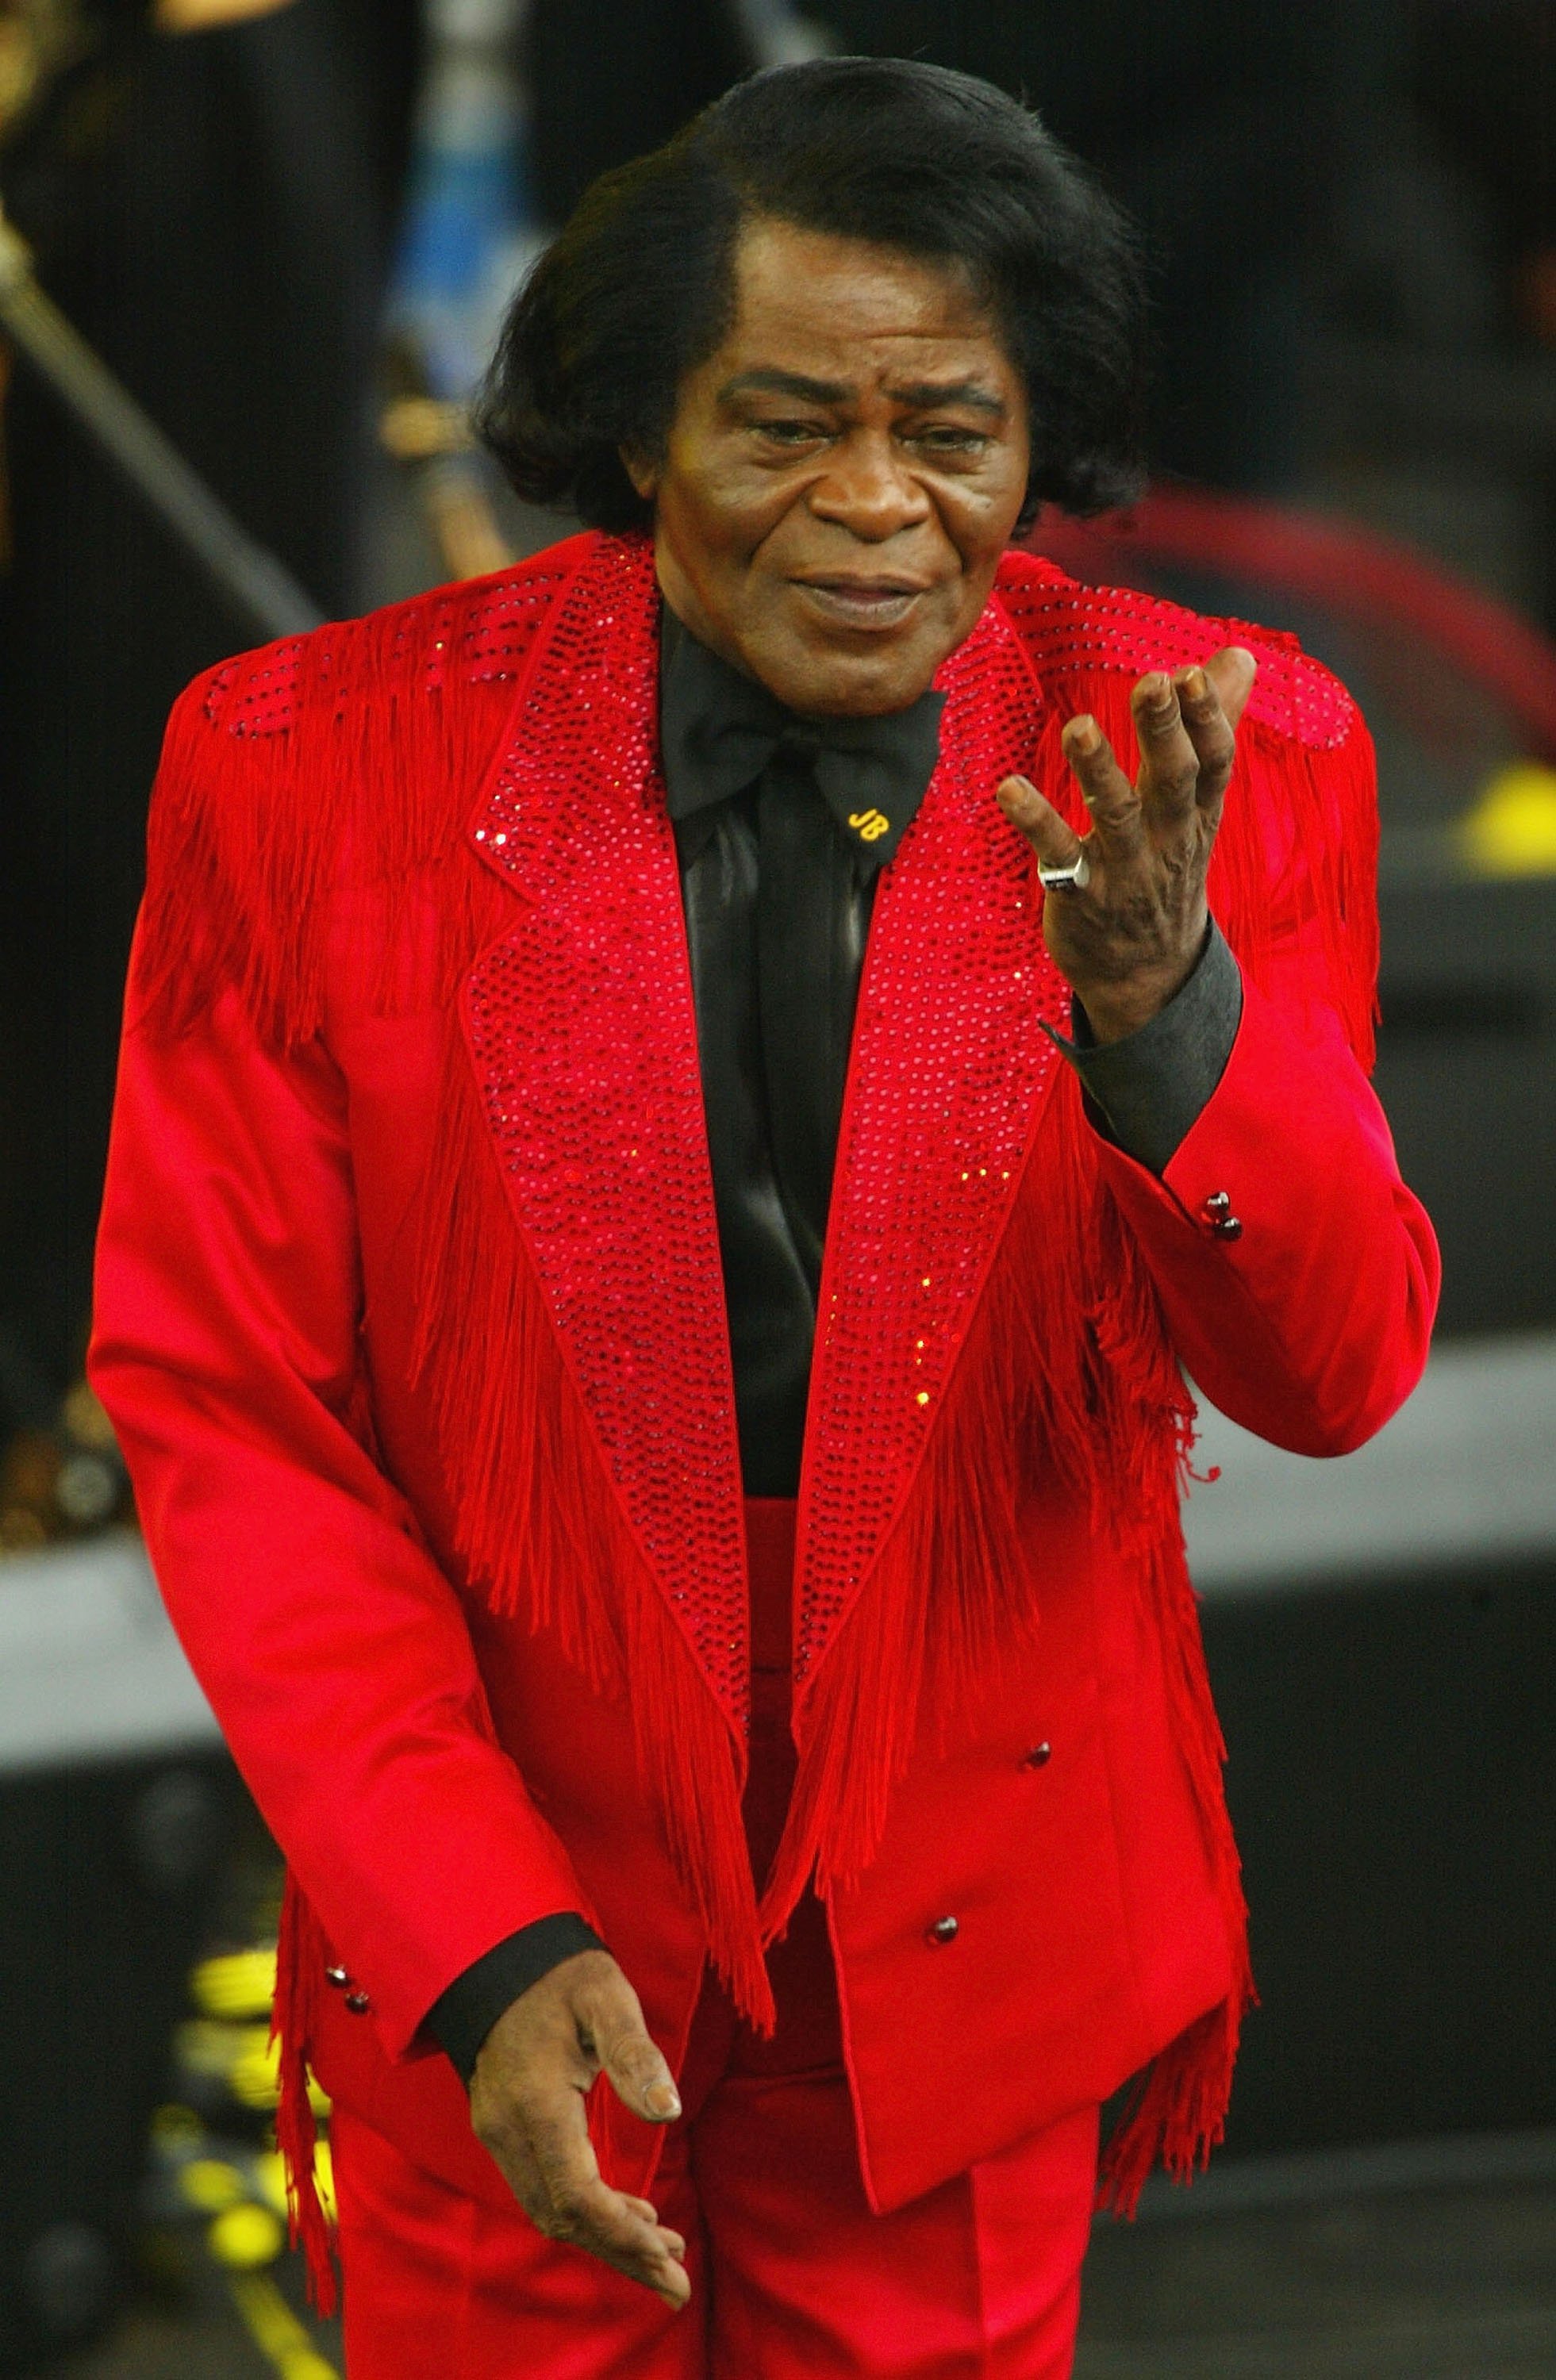 James Brown performs on stage at the Olympic Torch Concert held in The Mall on June 26, 2004. | Photo: Getty Images